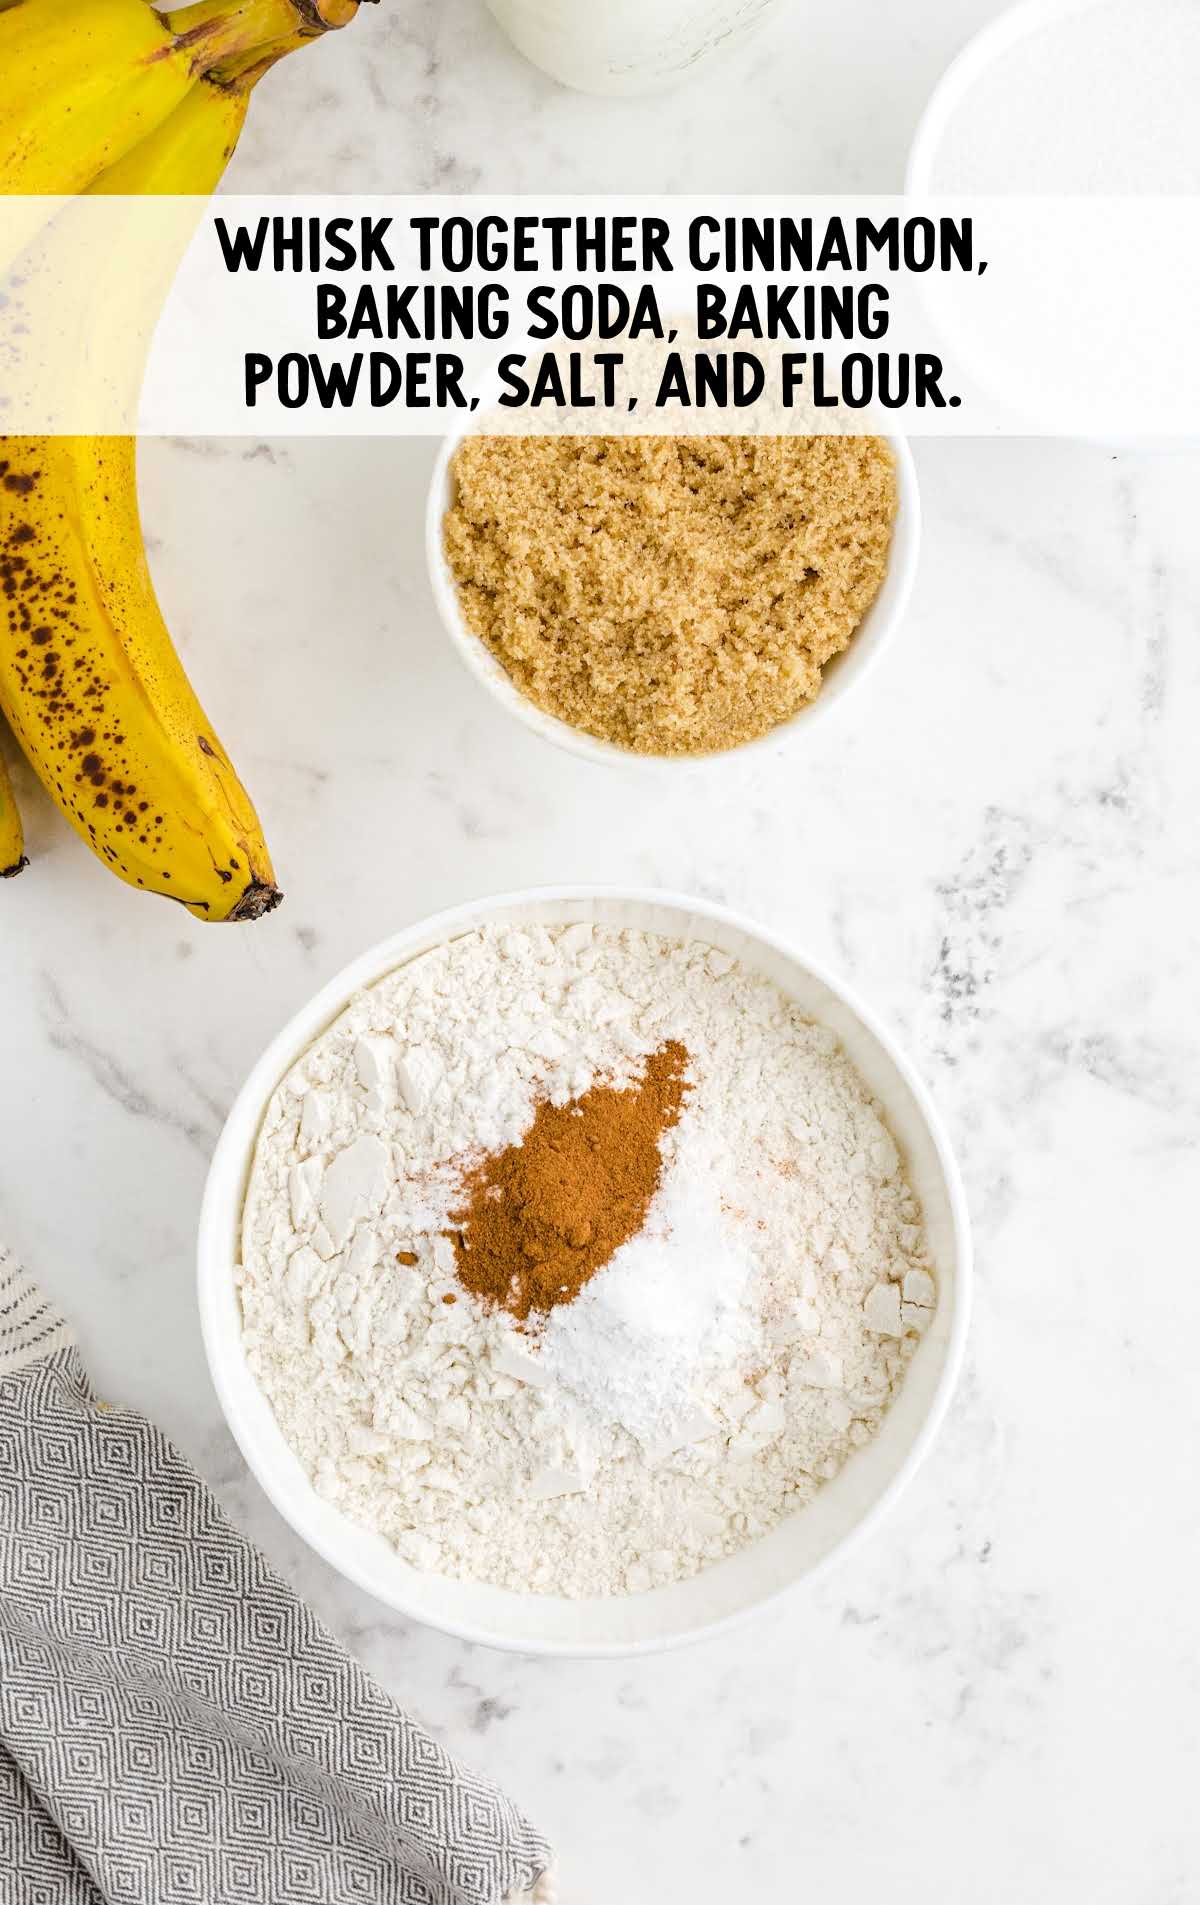 cinnamon, baking soda, baking powder, salt, and flour whisked together in a cup